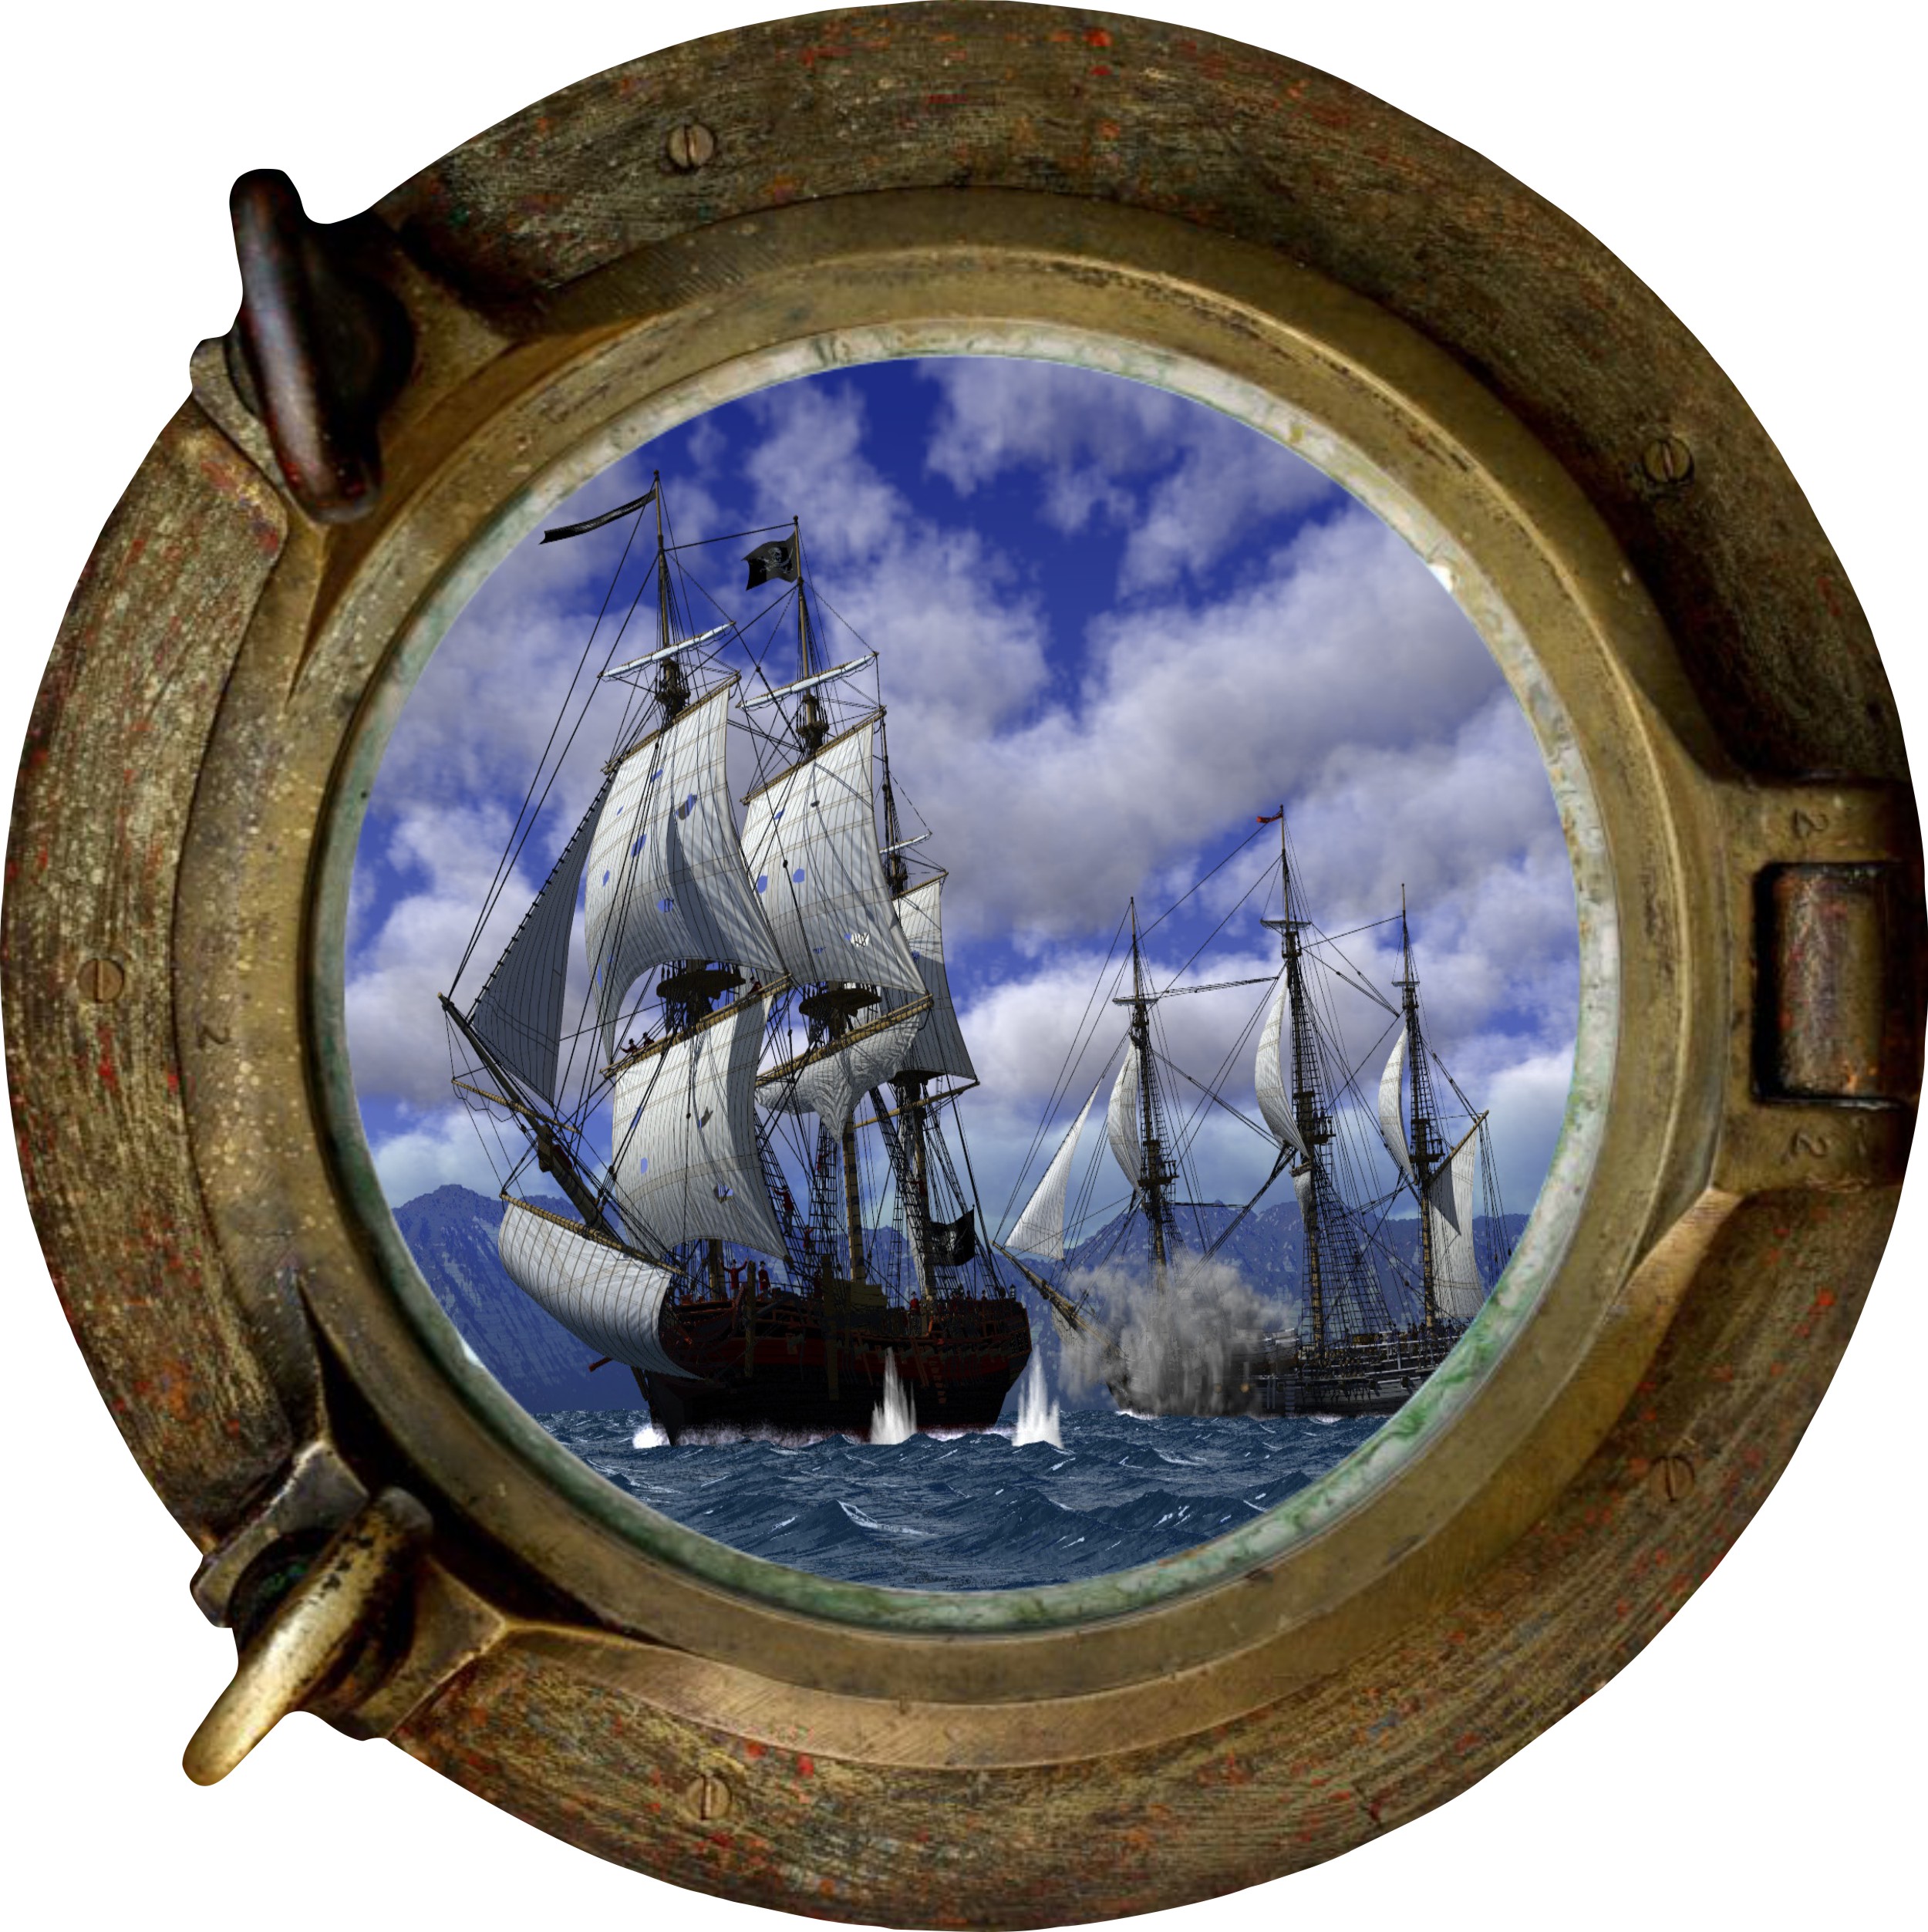 Huge 3D Porthole Fantasy Pirate Ship View Wall Stickers Film Art Decal